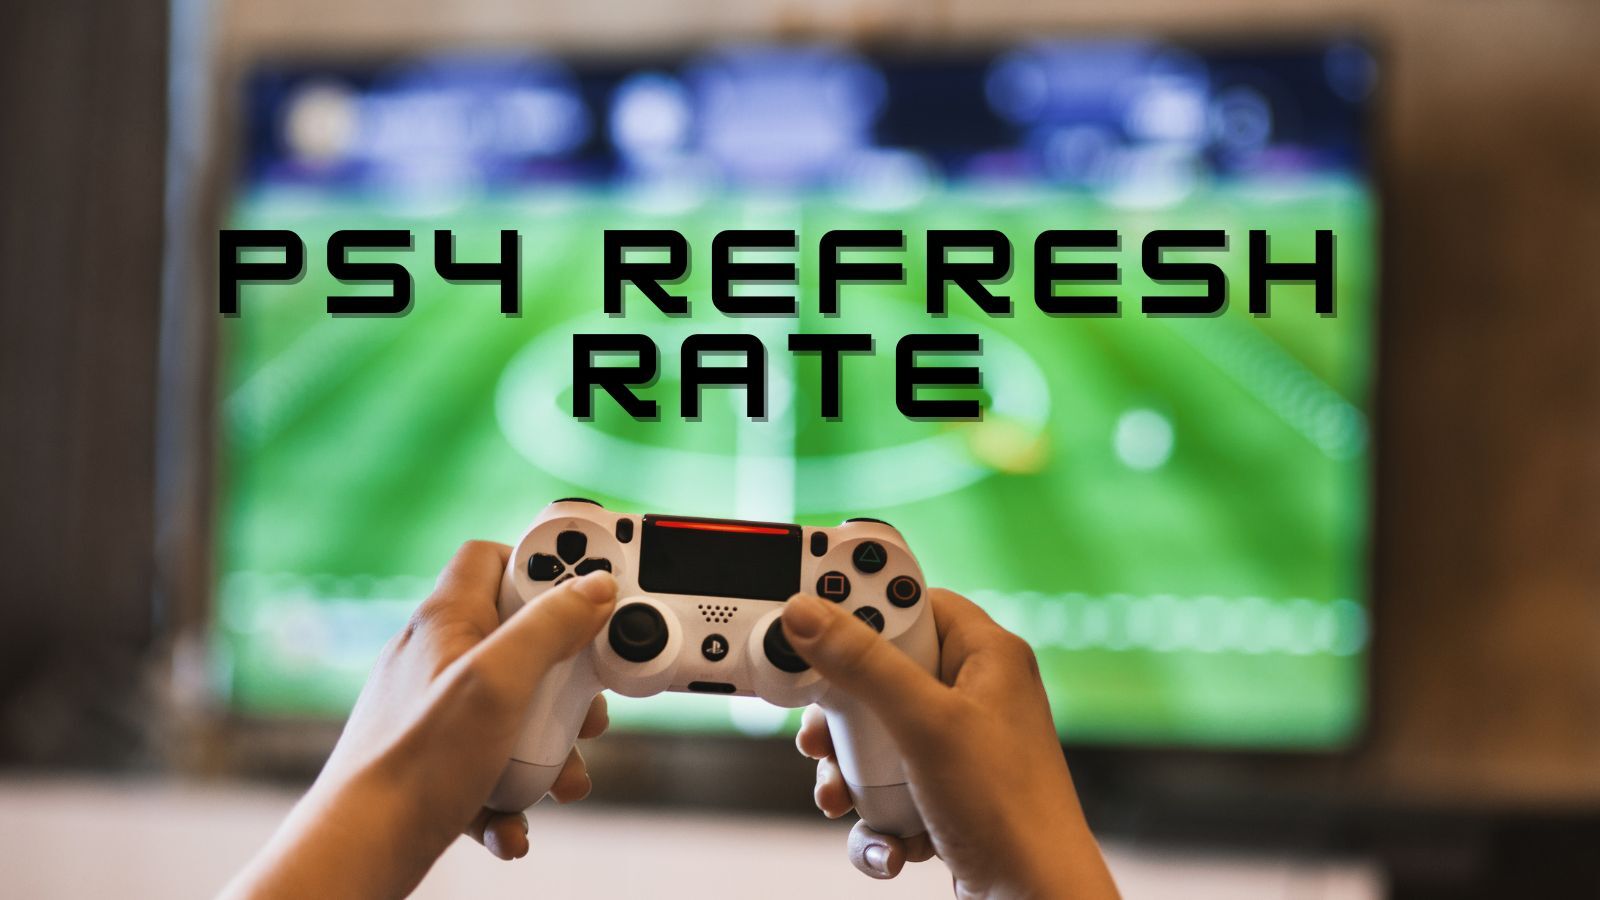 What is the PS4 Refresh Rate: 120 or 144HZ